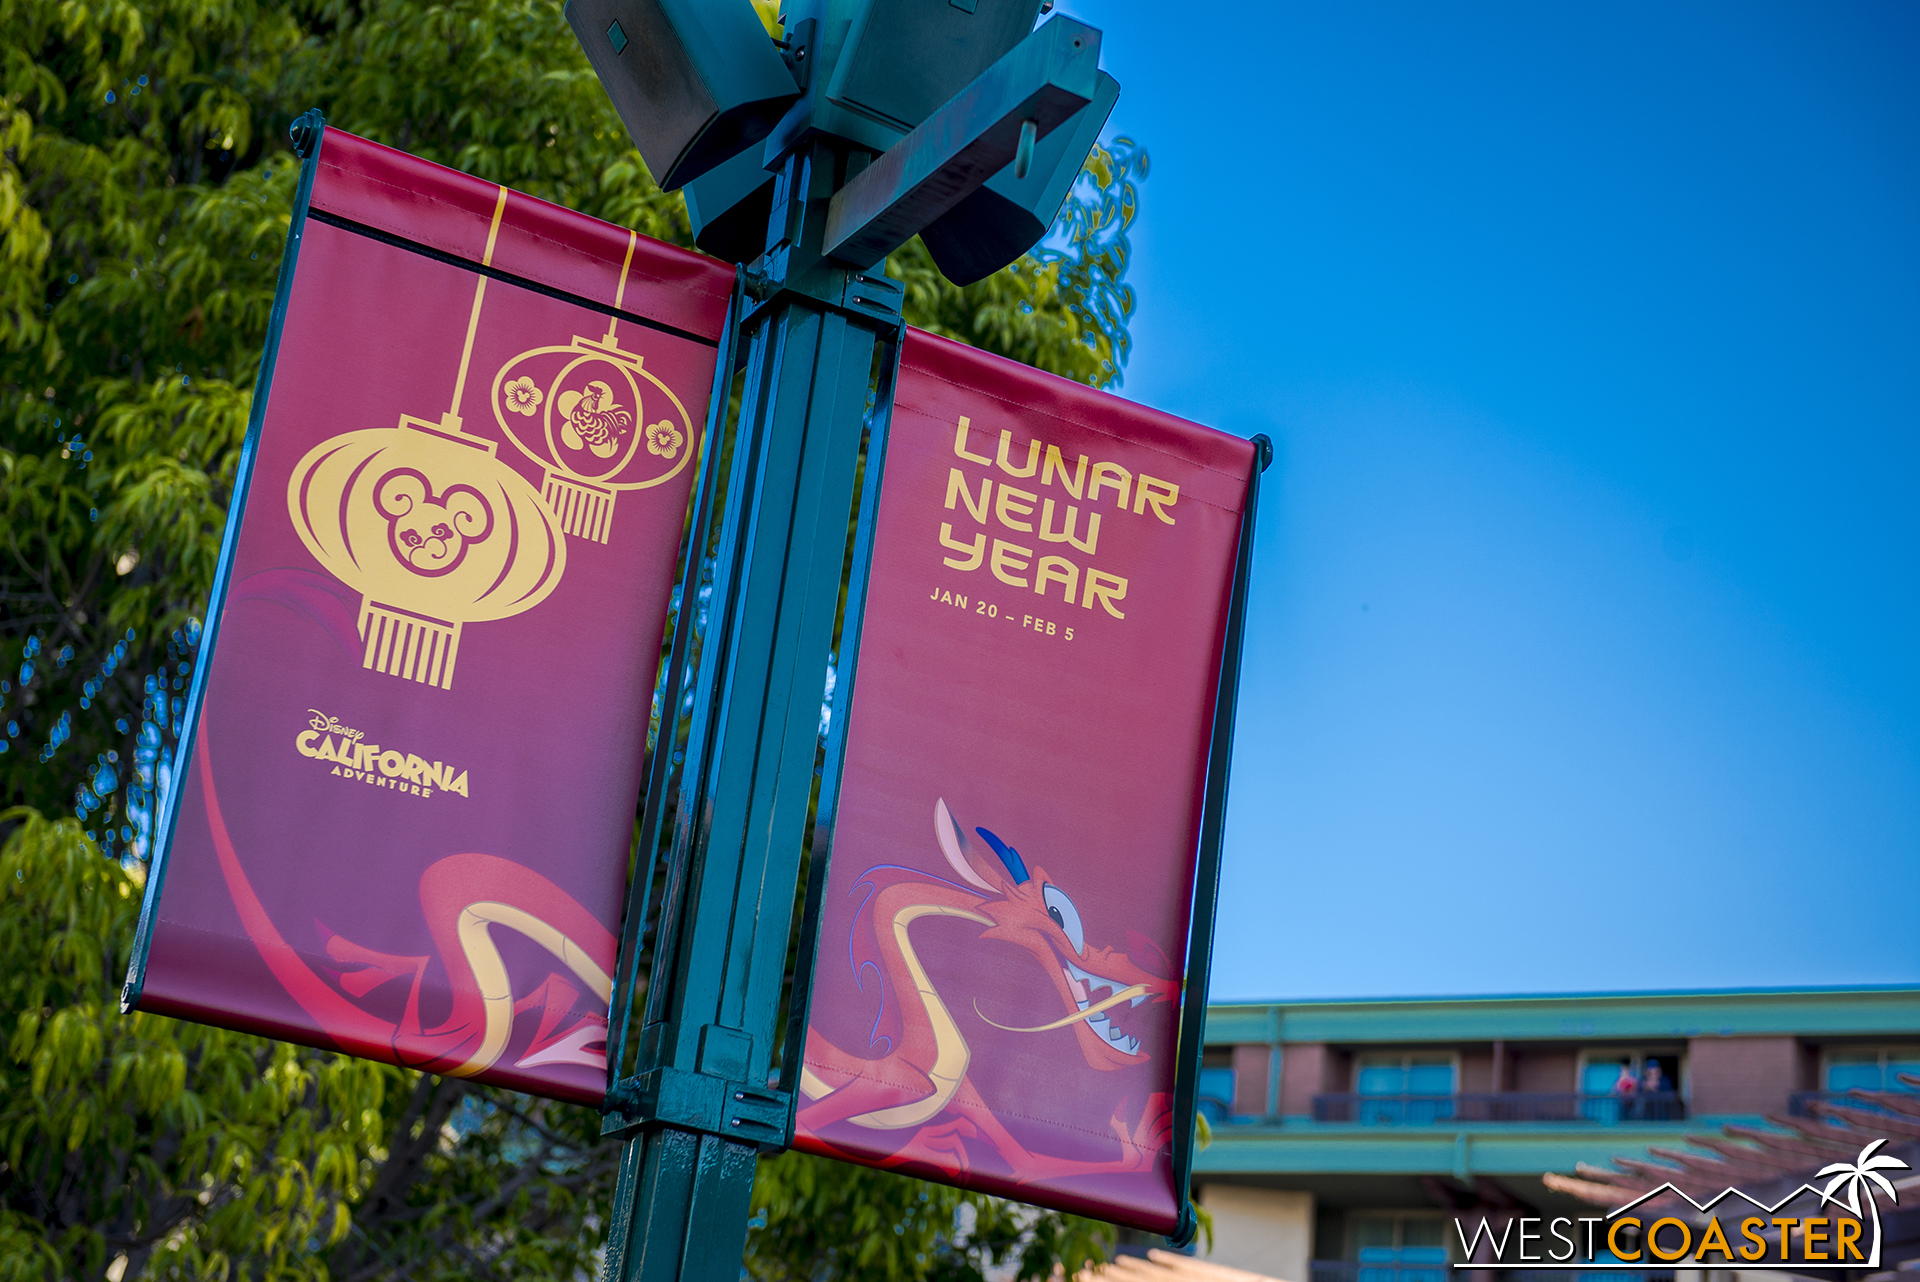  Banners are up for the Lunar New Year celebration at Disney California Adventure, running Friday, January 20 - (Super Bowl) Sunday, February 5. 